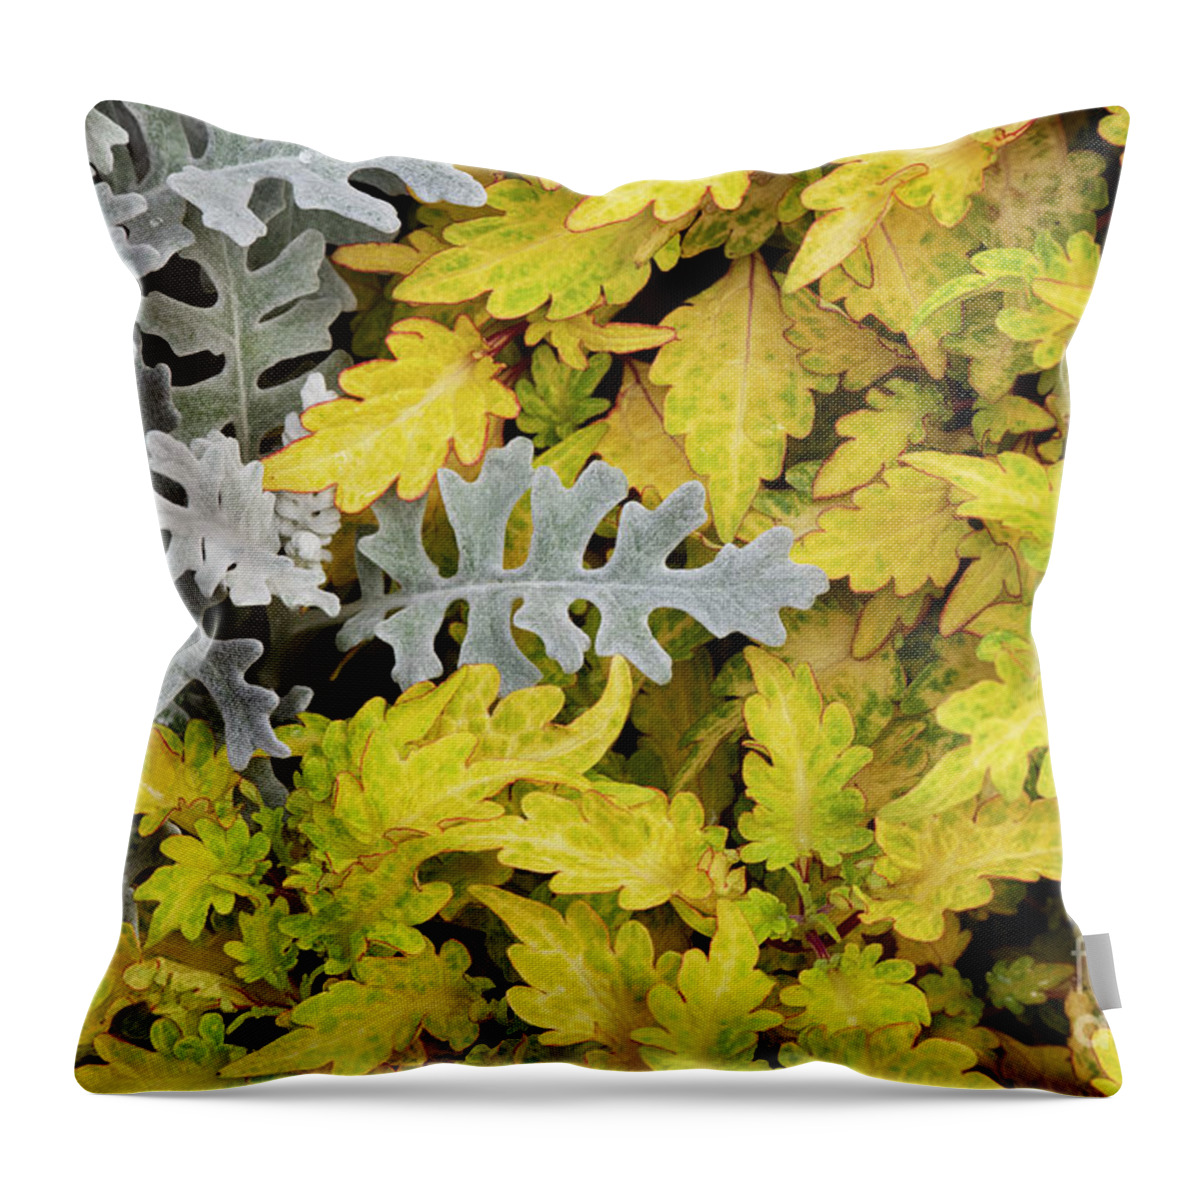 Senecio Cineraria Silver Dust Throw Pillow featuring the photograph Silver ragwort Silver Dust with Coleus Foliage by Tim Gainey